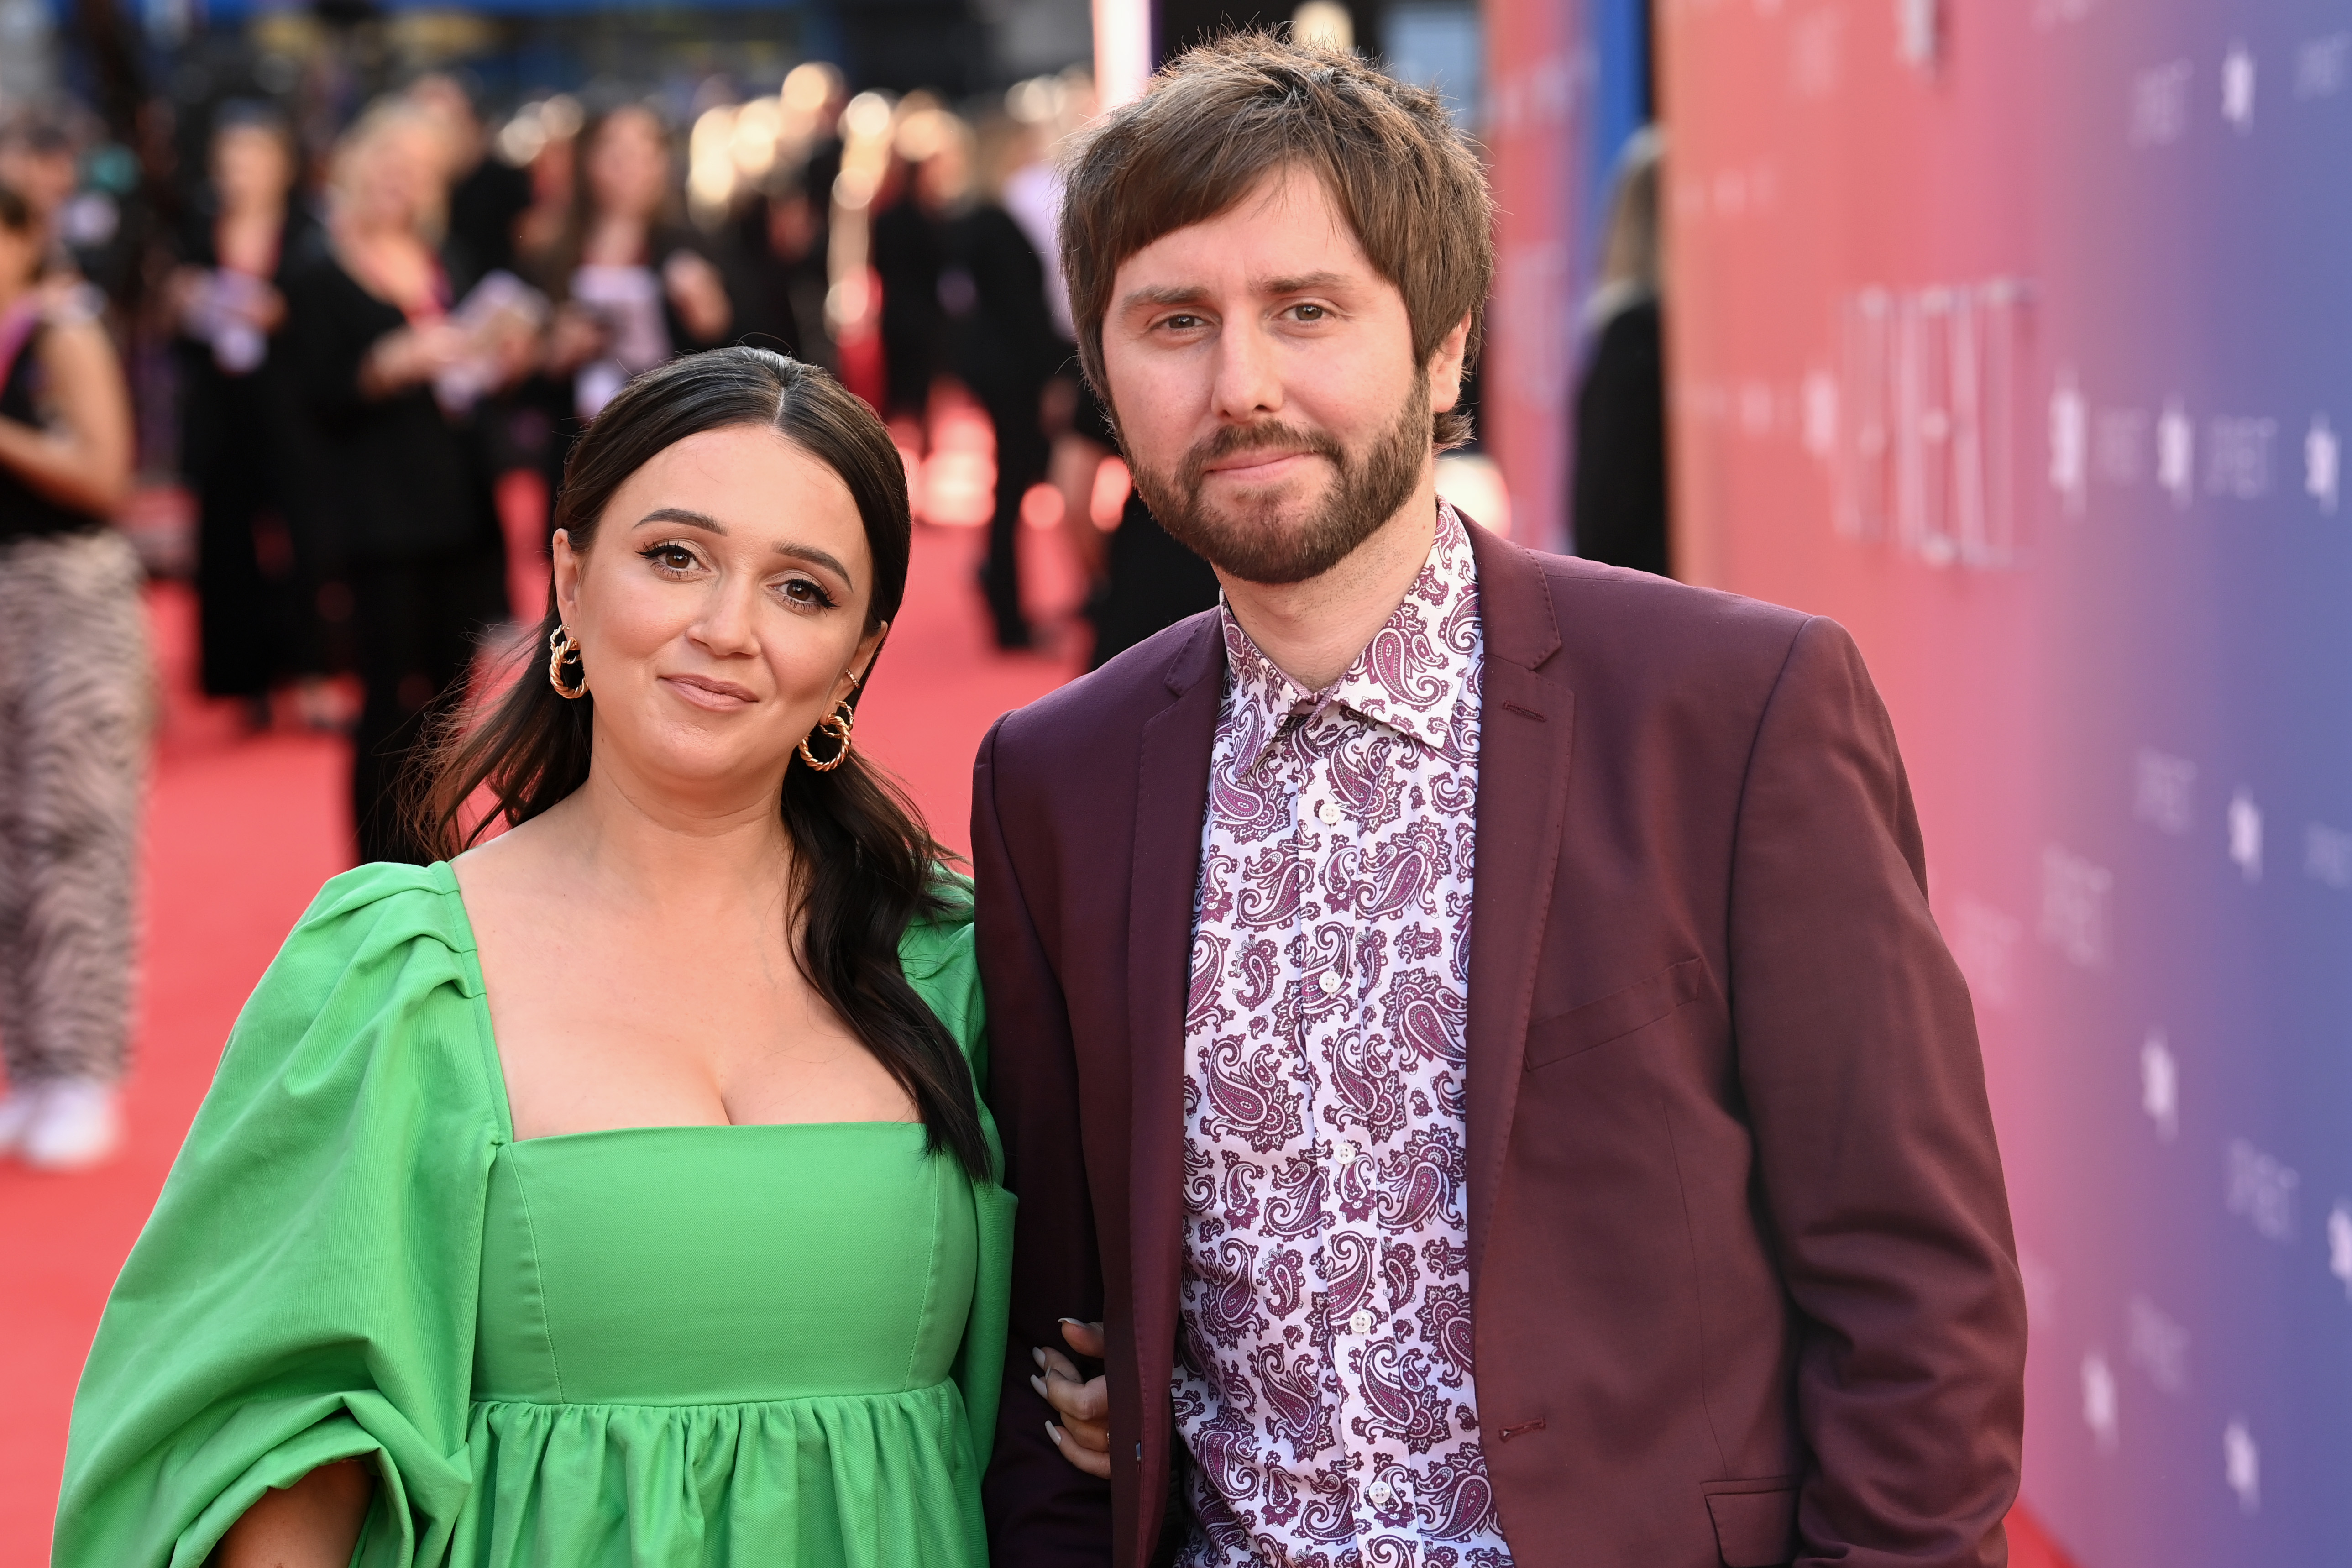 Inbetweeners' James Buckley shamed by wife over his 'selfish' Valentine's Day plans